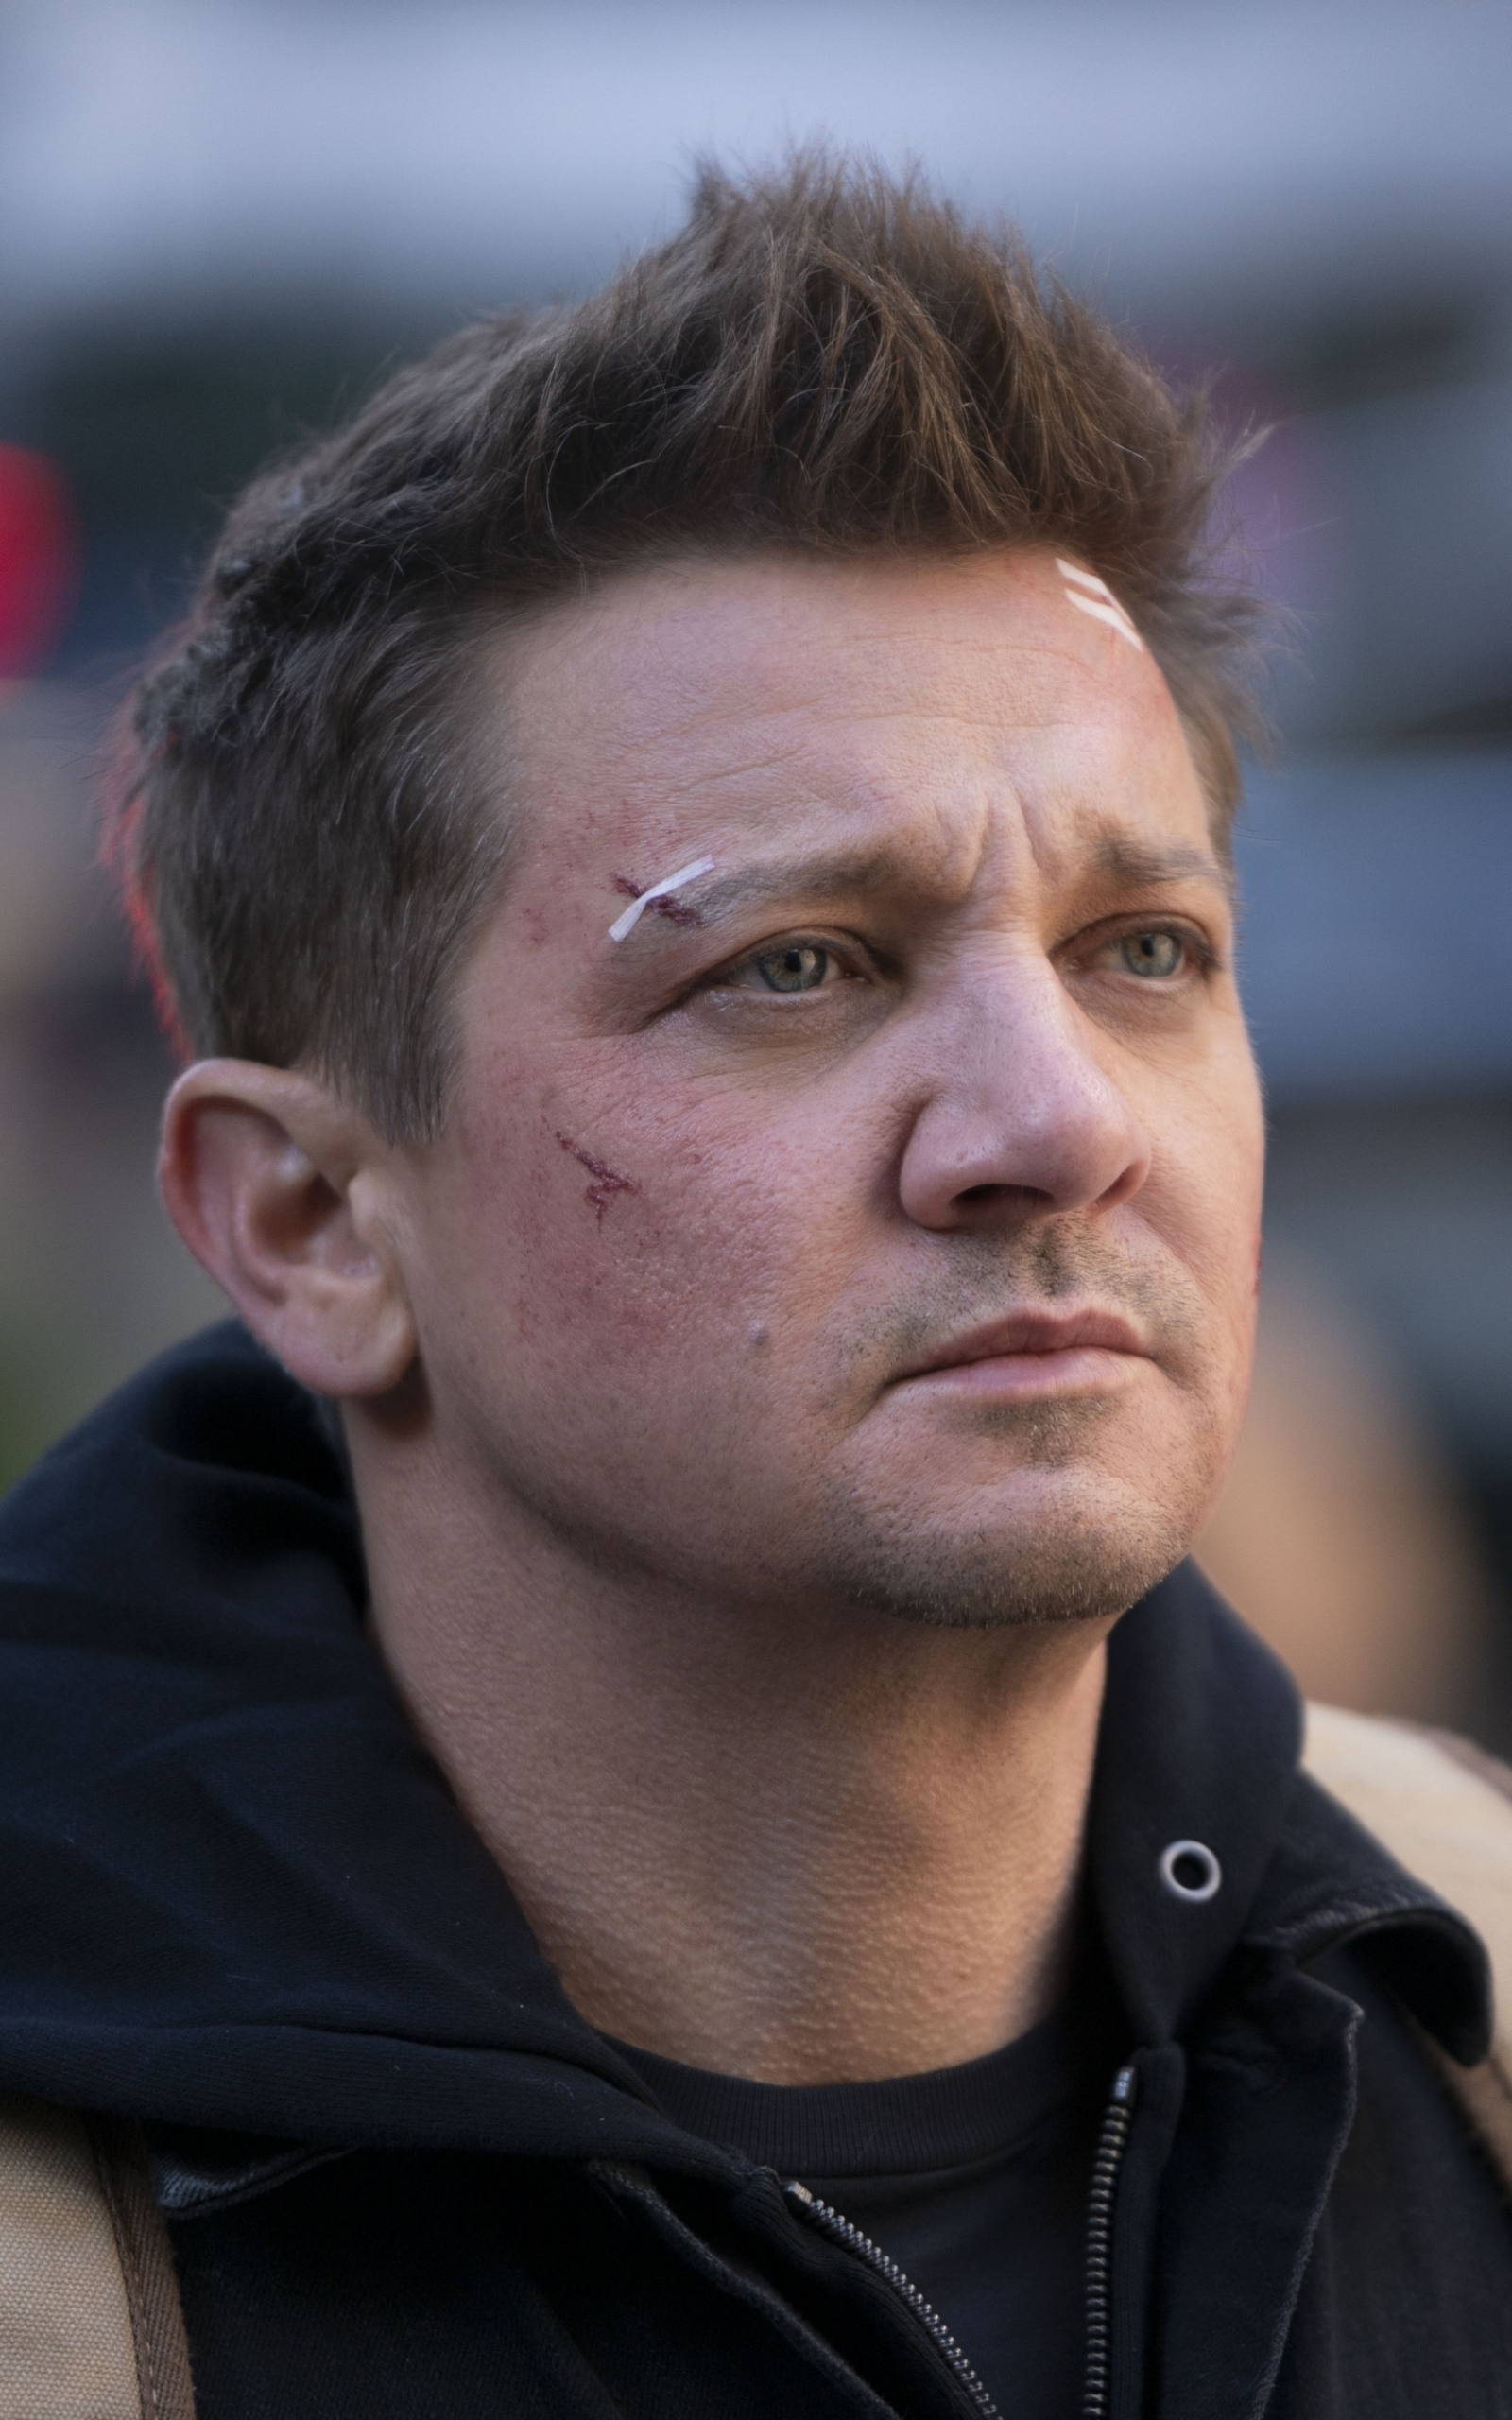 Jeremy Renners hairstyle is the biggest mystery in Avengers Endgame  trailer